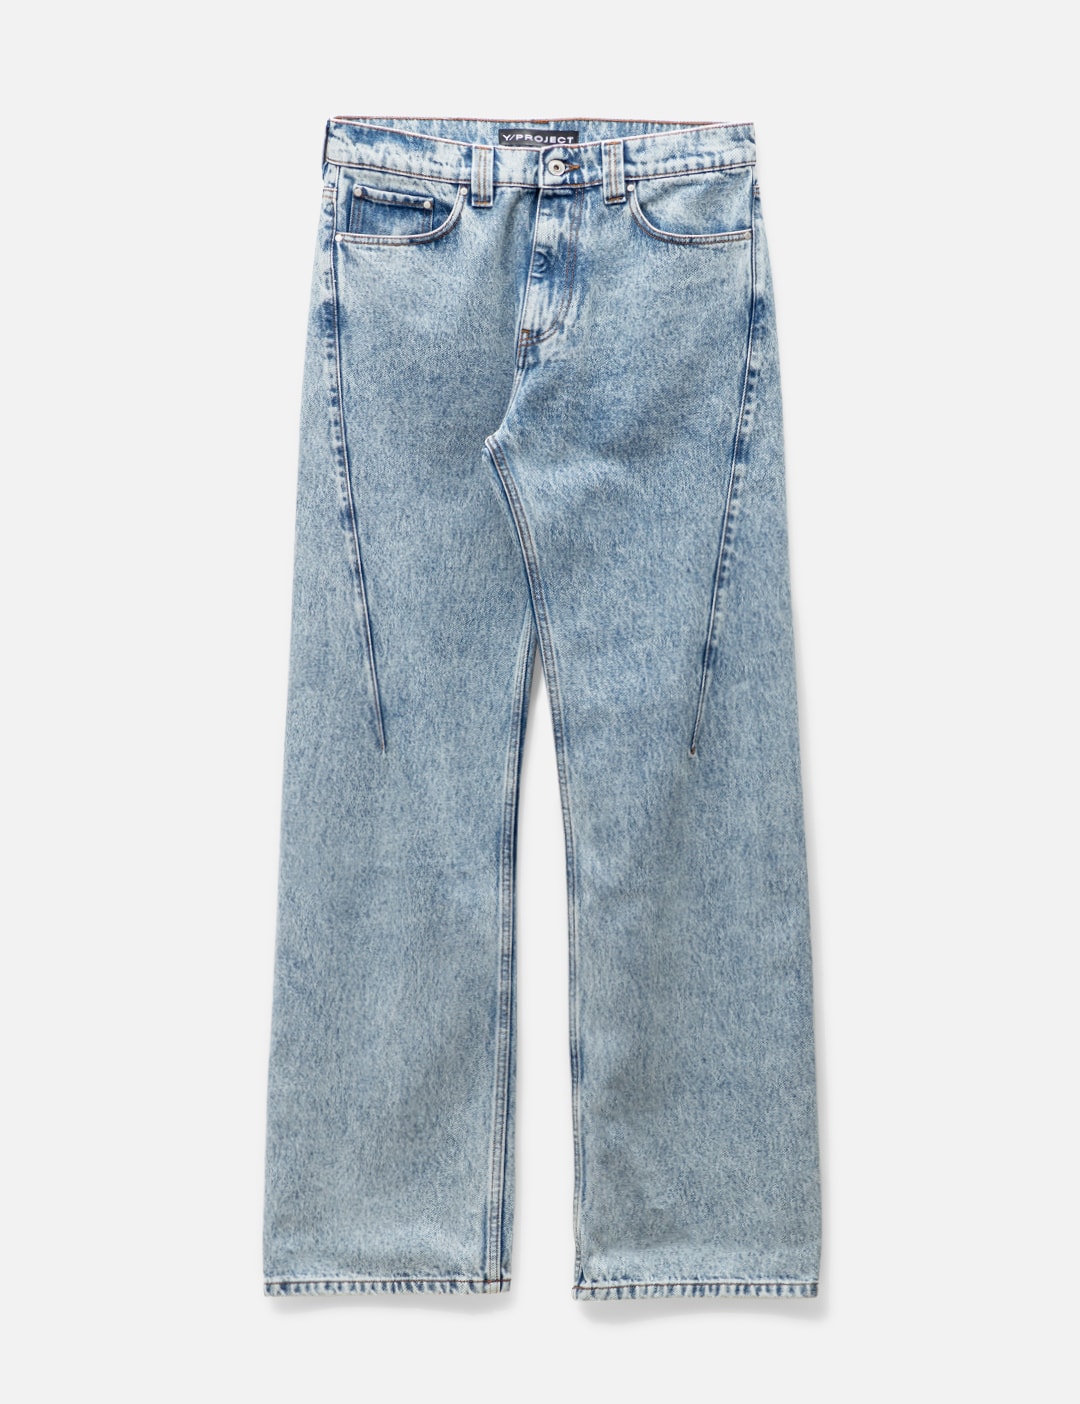 Y/PROJECT - PARIS' BEST JEANS | HBX - Globally Curated Fashion and ...